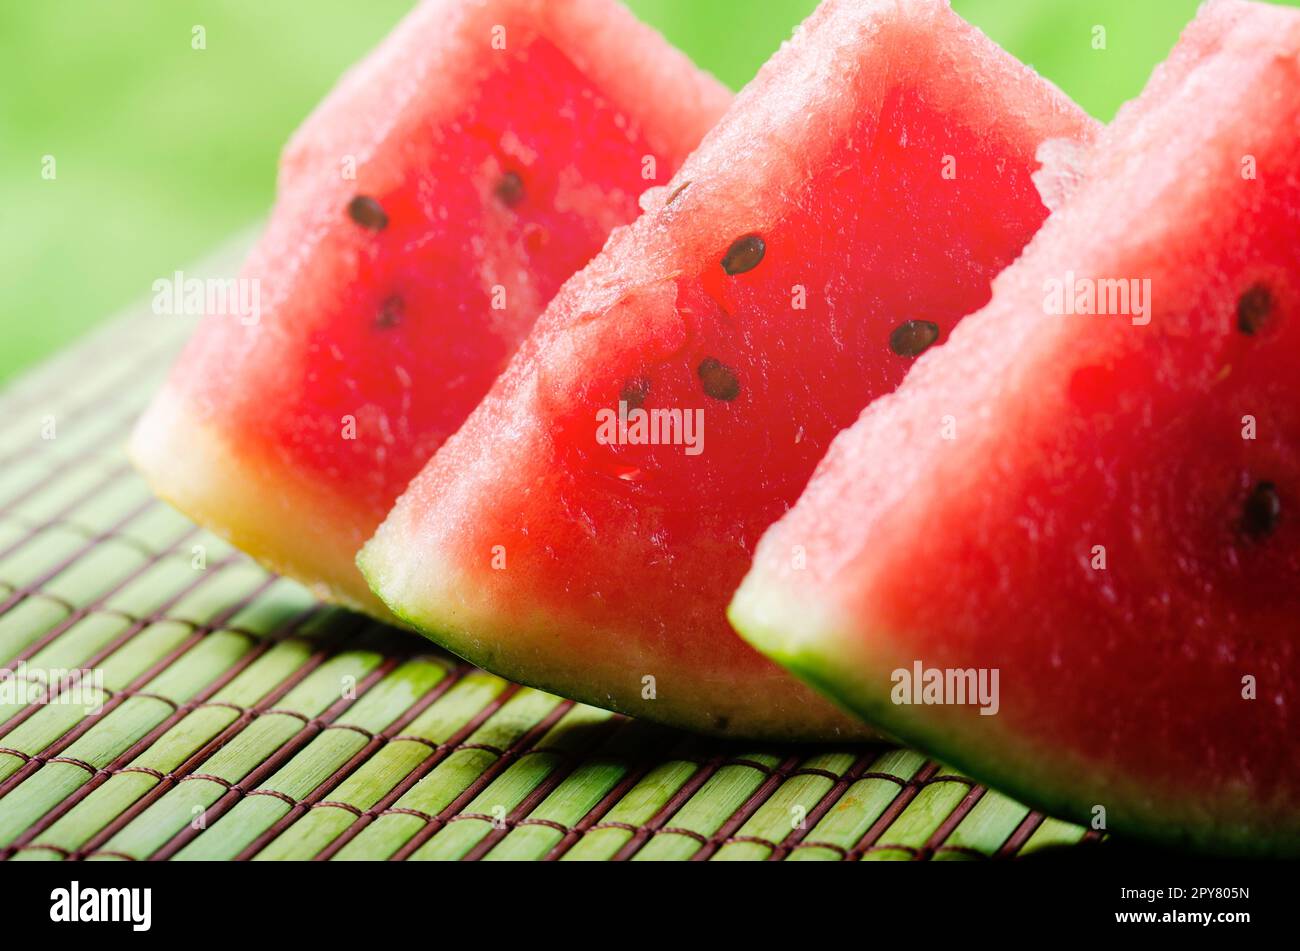 Closeup of sweet red watermelon slices on green table background in garden with sunlight. Stock Photo